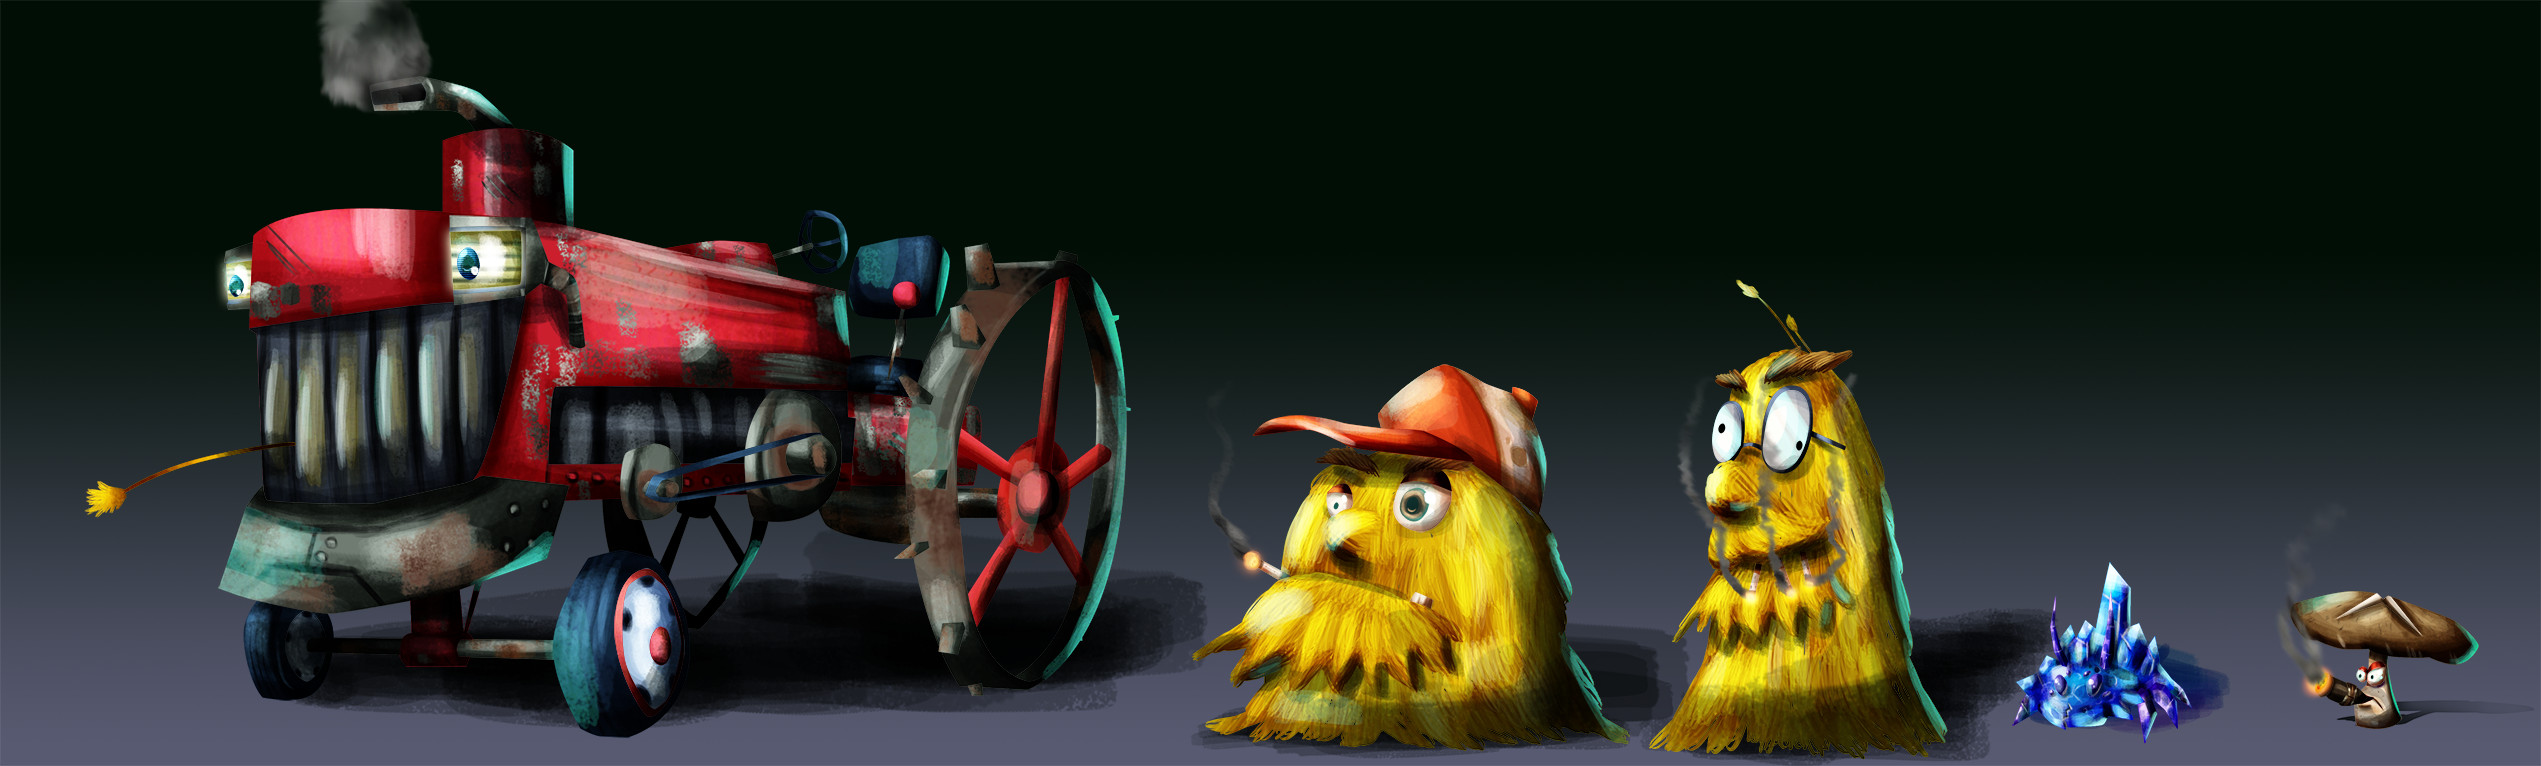 The supporting cast: Mr. Tractor, the haystack bros Jack and Burt, some crystal mite, and a shit-talking mushroom.